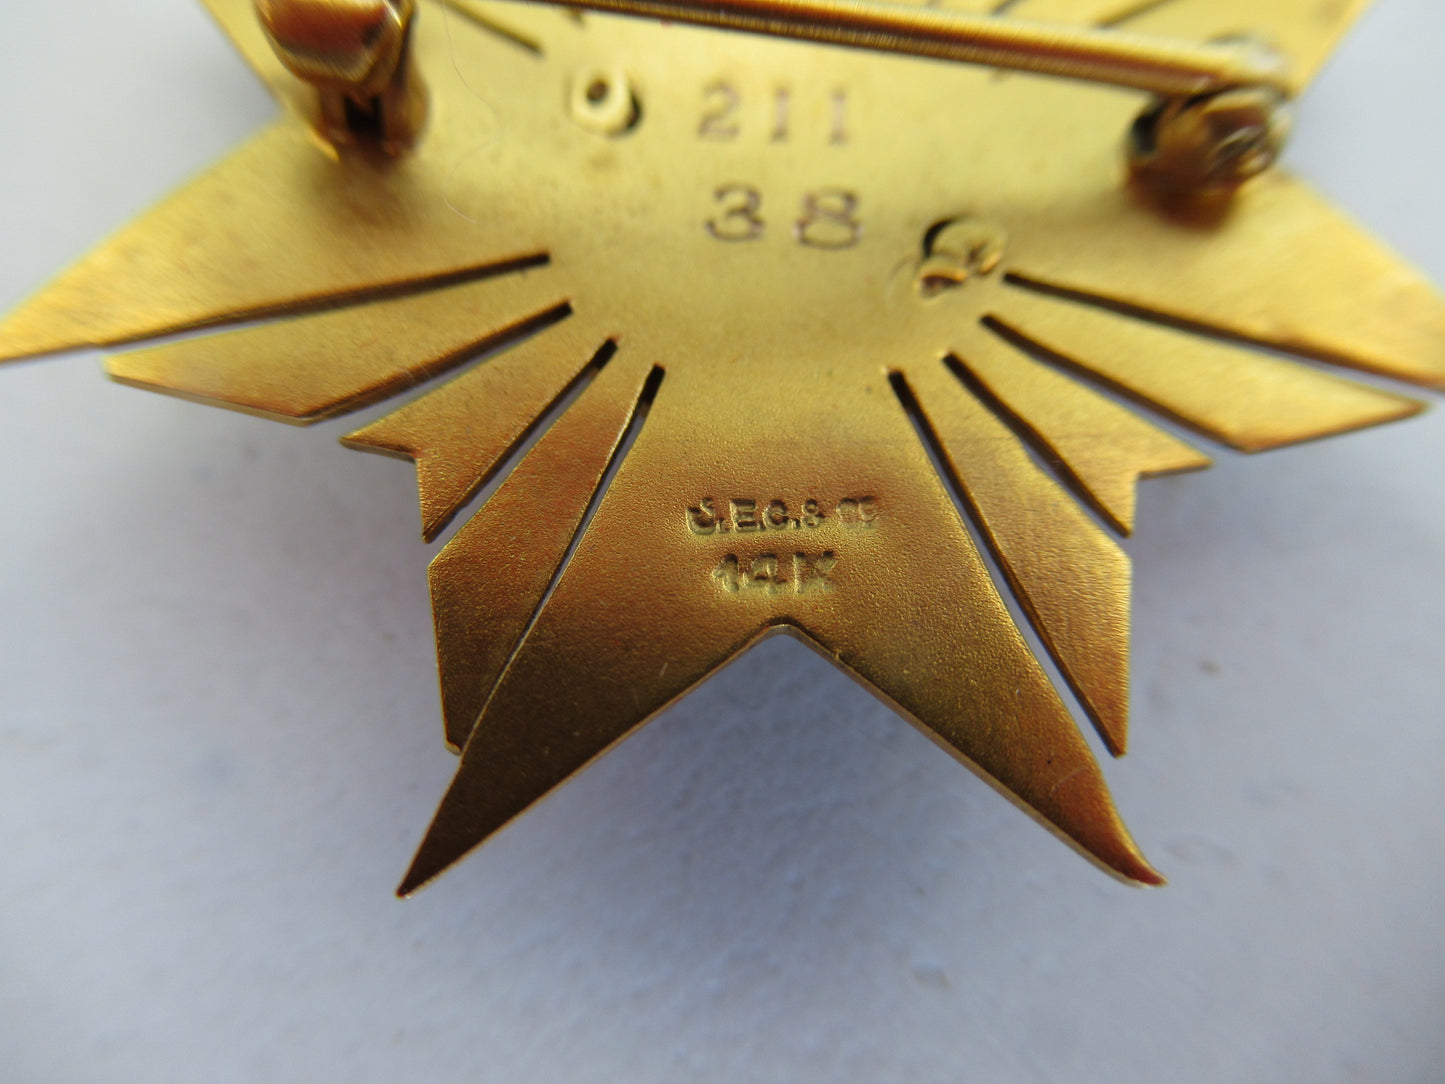 USA SOCIETY BADGE MEDAL FOR THE DAMES OF THE LOYAL LEGION. MADE IN GOLD. NUMBERED 211 & 38. MARKED WITH MAKER'S INITIALS AND 14K. COMES WITH GOLD 'MICHIGAN' AND NAMED BARS. RR!!